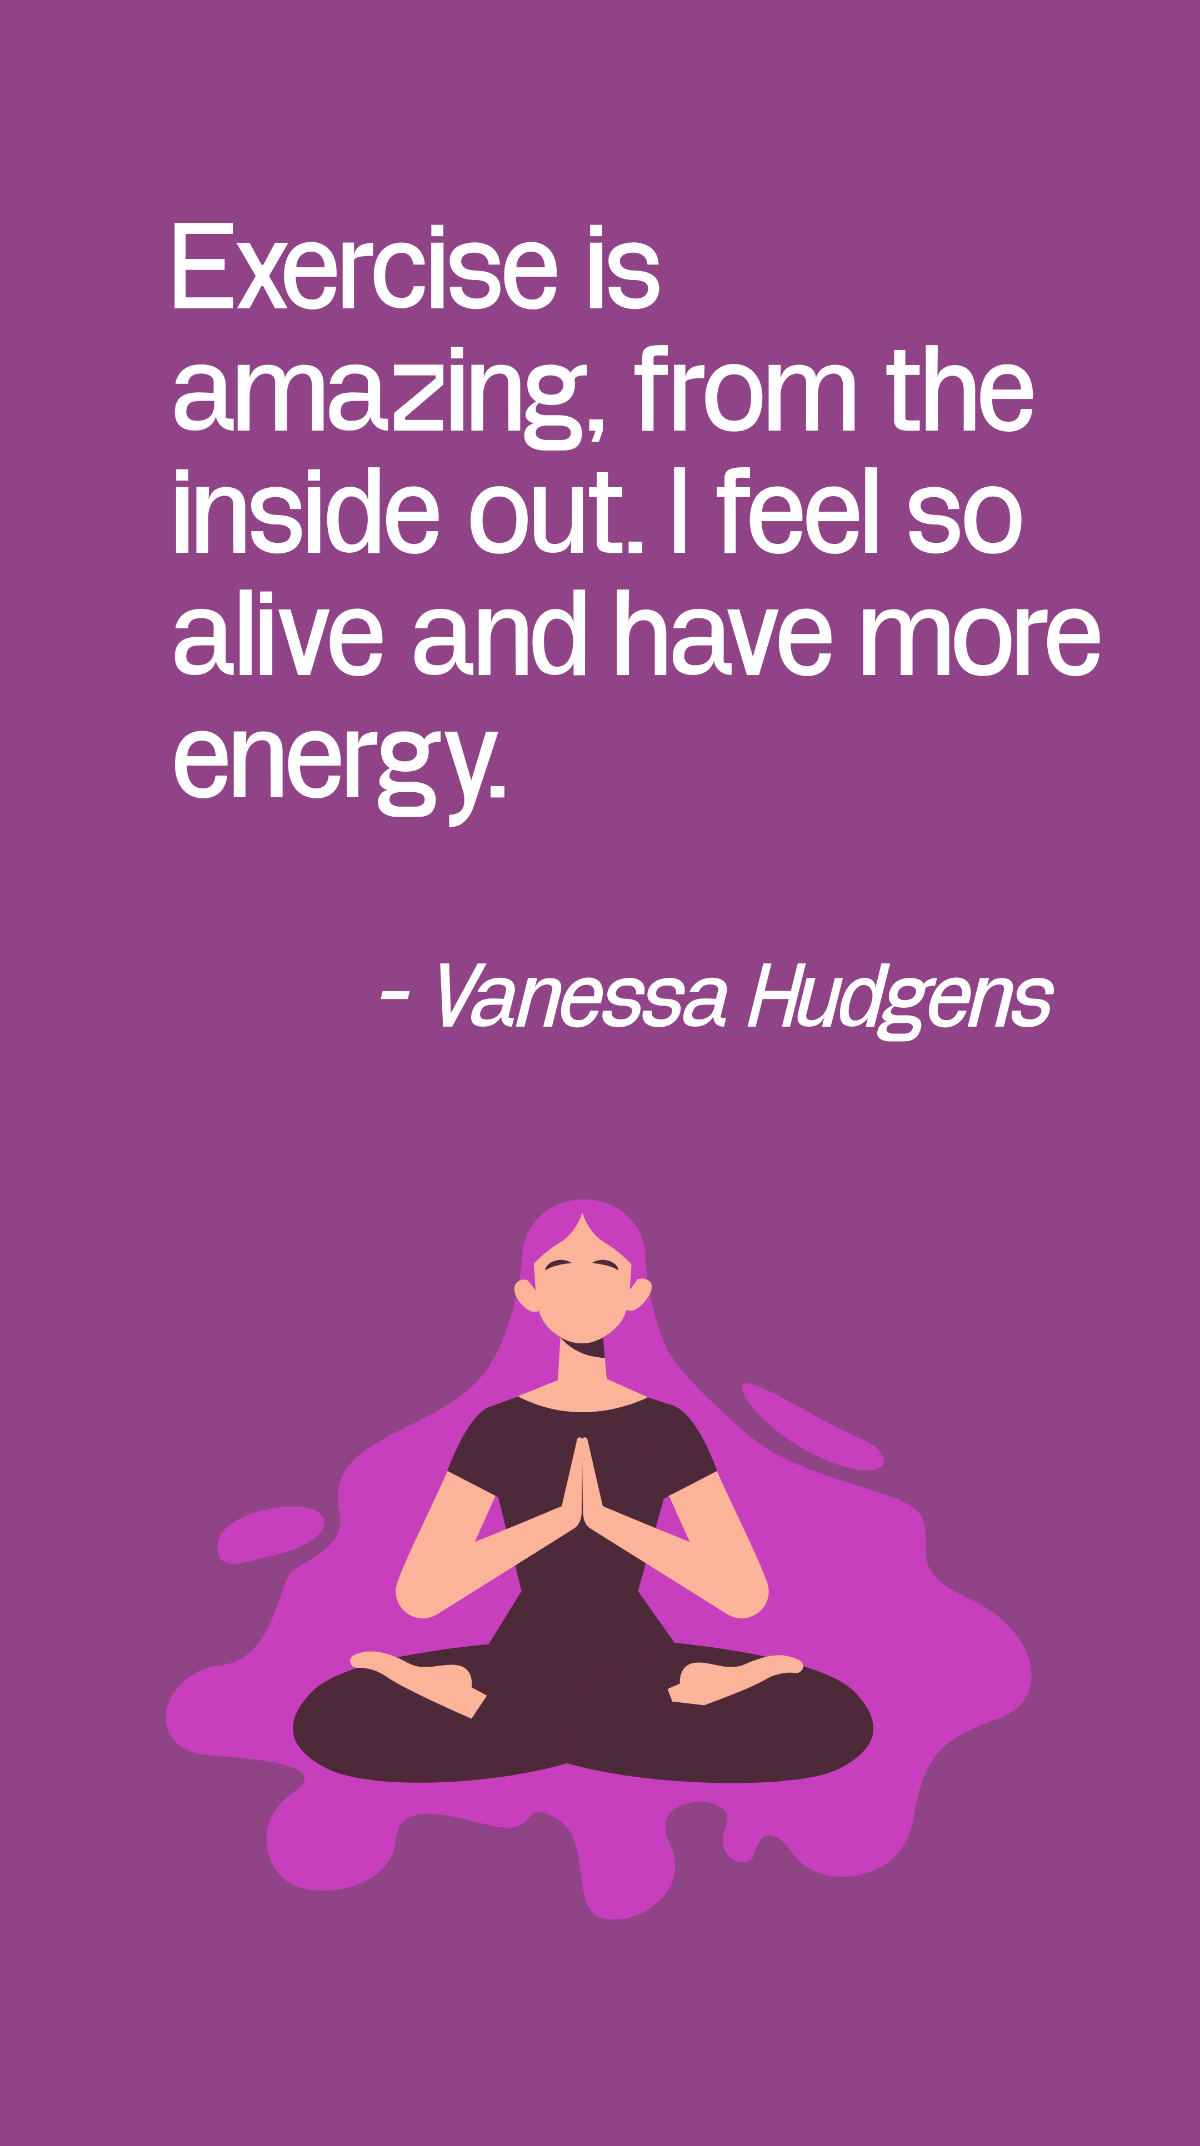 Vanessa Hudgens - Exercise is amazing, from the inside out. I feel so alive and have more energy.